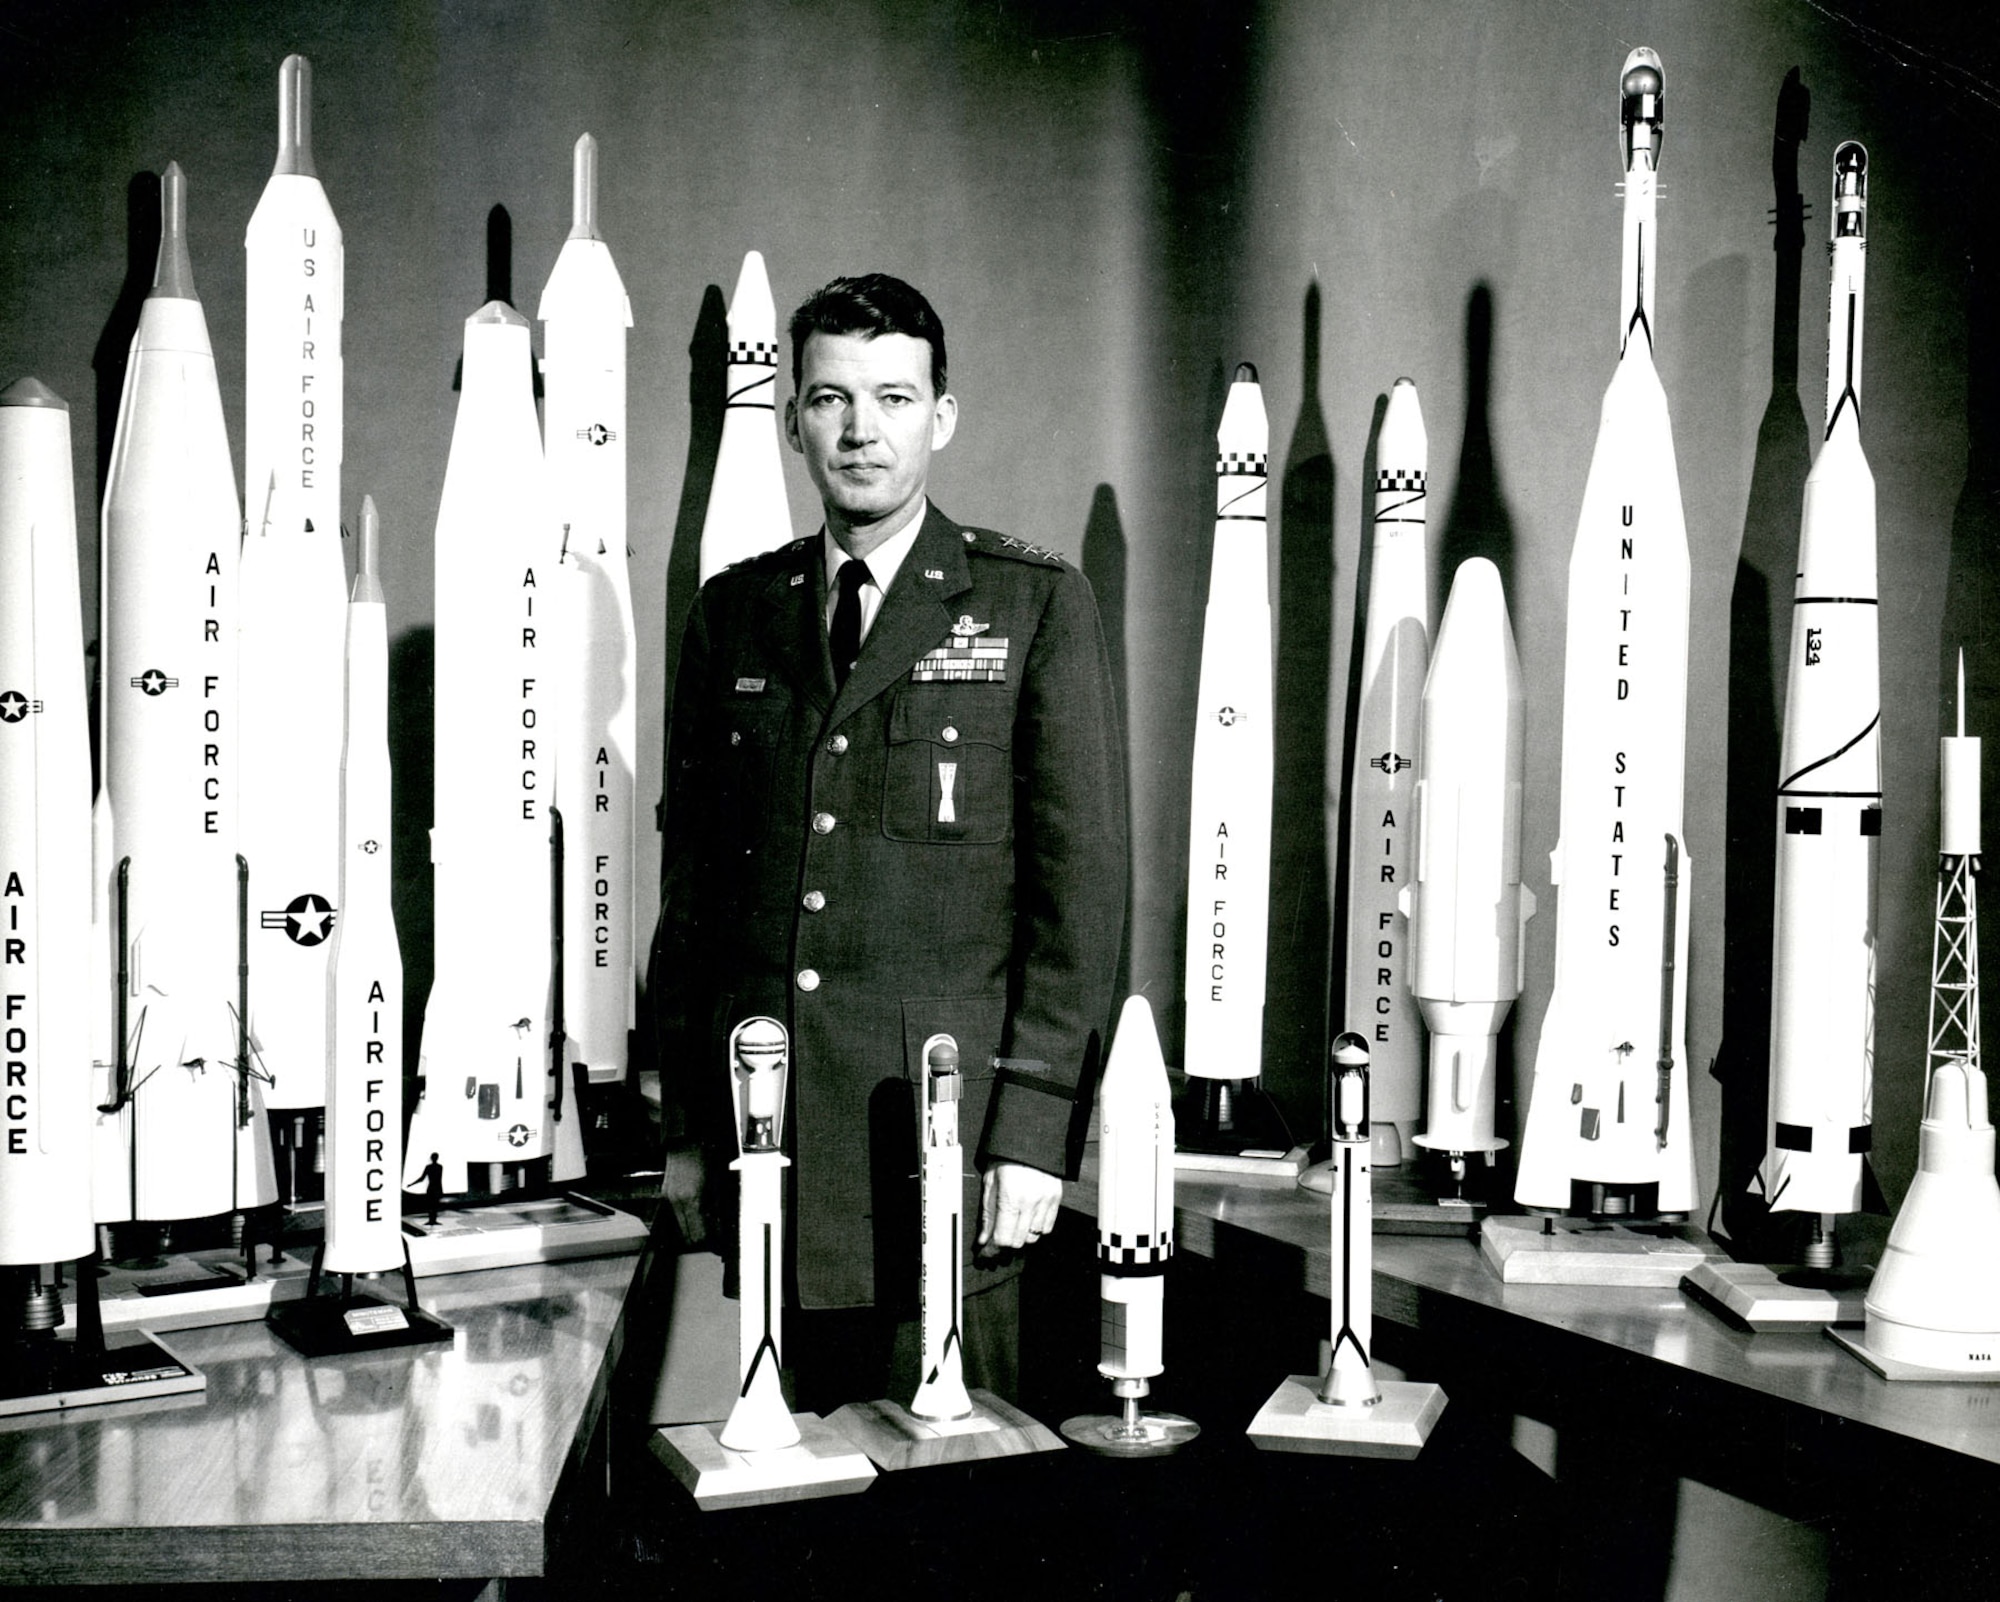 The “Father of Air Force space and missiles” with some of the systems created under his leadership. His management philosophy made rapid development possible. (U.S. Air Force photo)